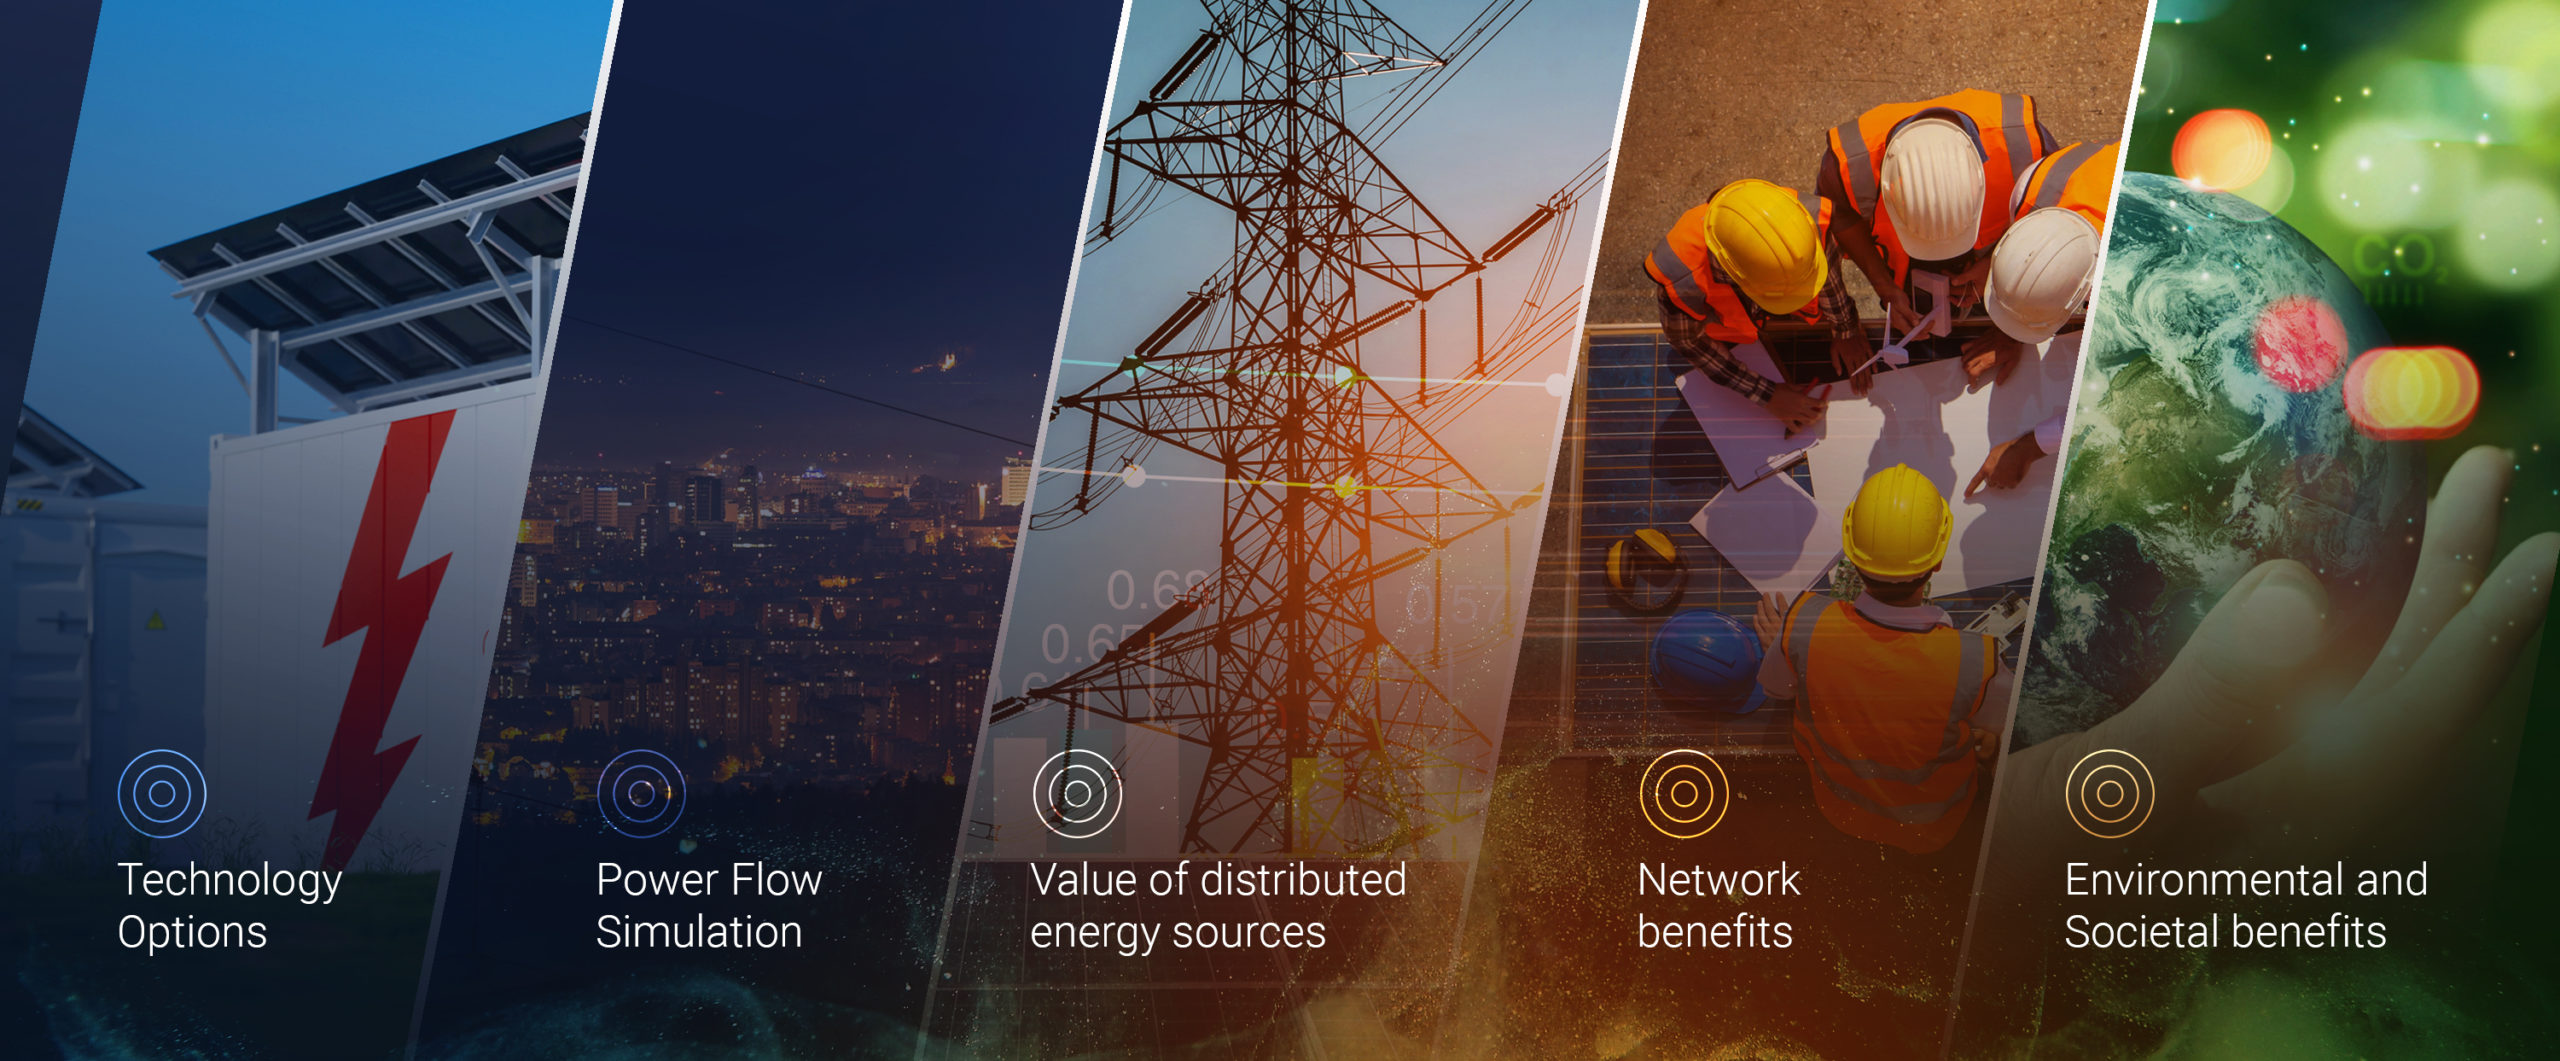 five images representing technology options, power flow simulation, value of distributed energy sources, network benefits, environmental and societal benefits.